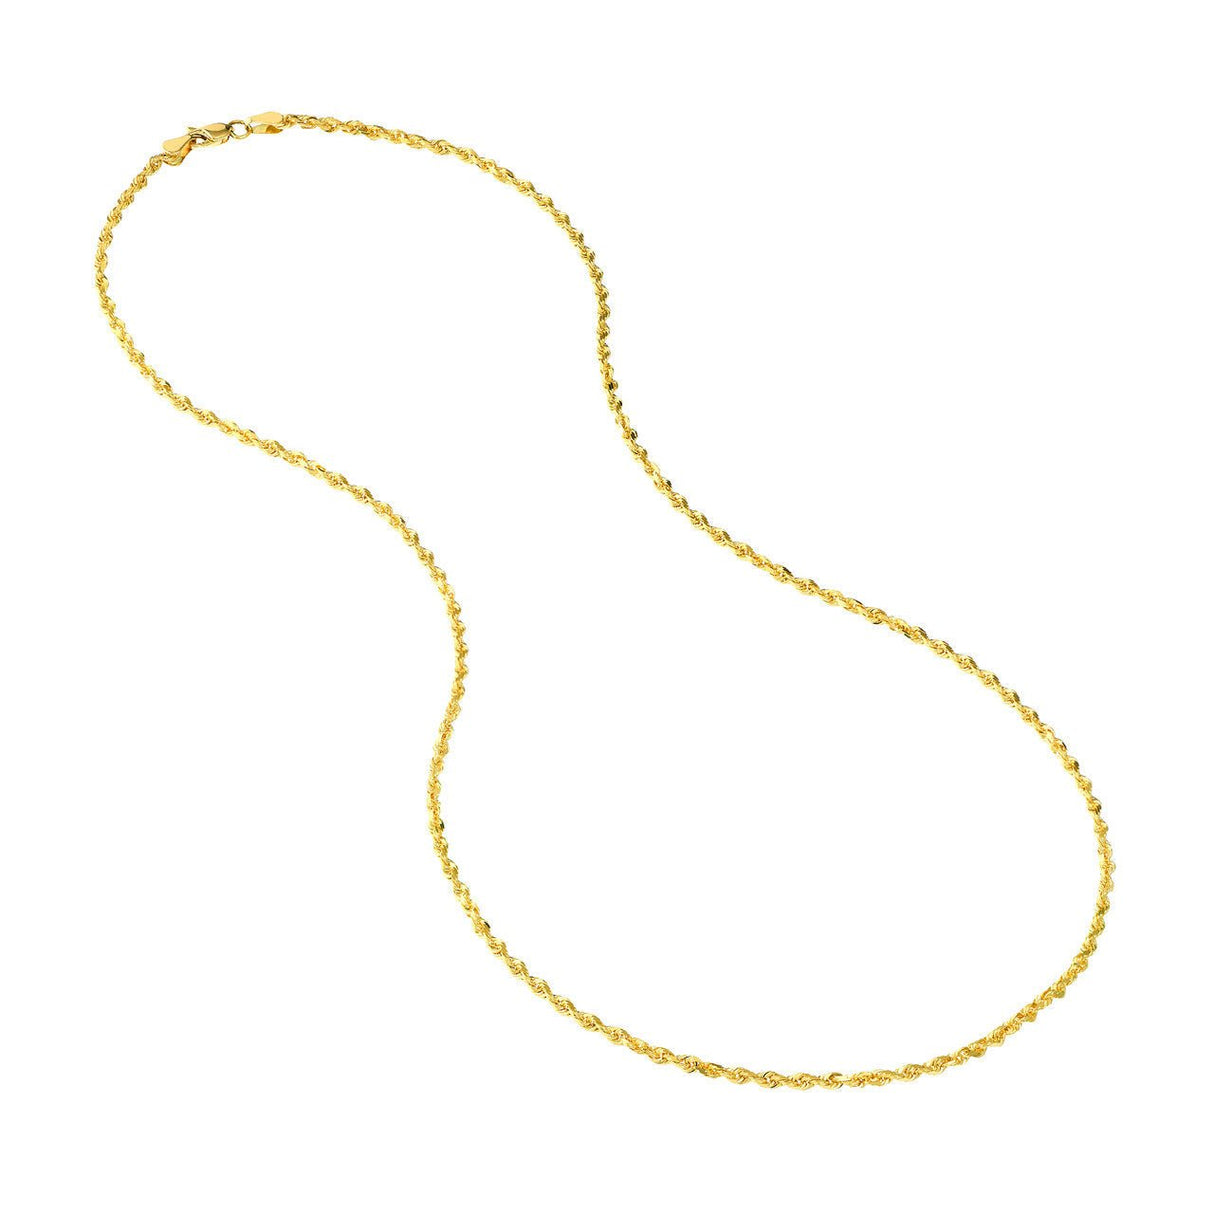 Gold Plated Spiral Coin Shaped Chain, Necklace Chain, Bulk Chain